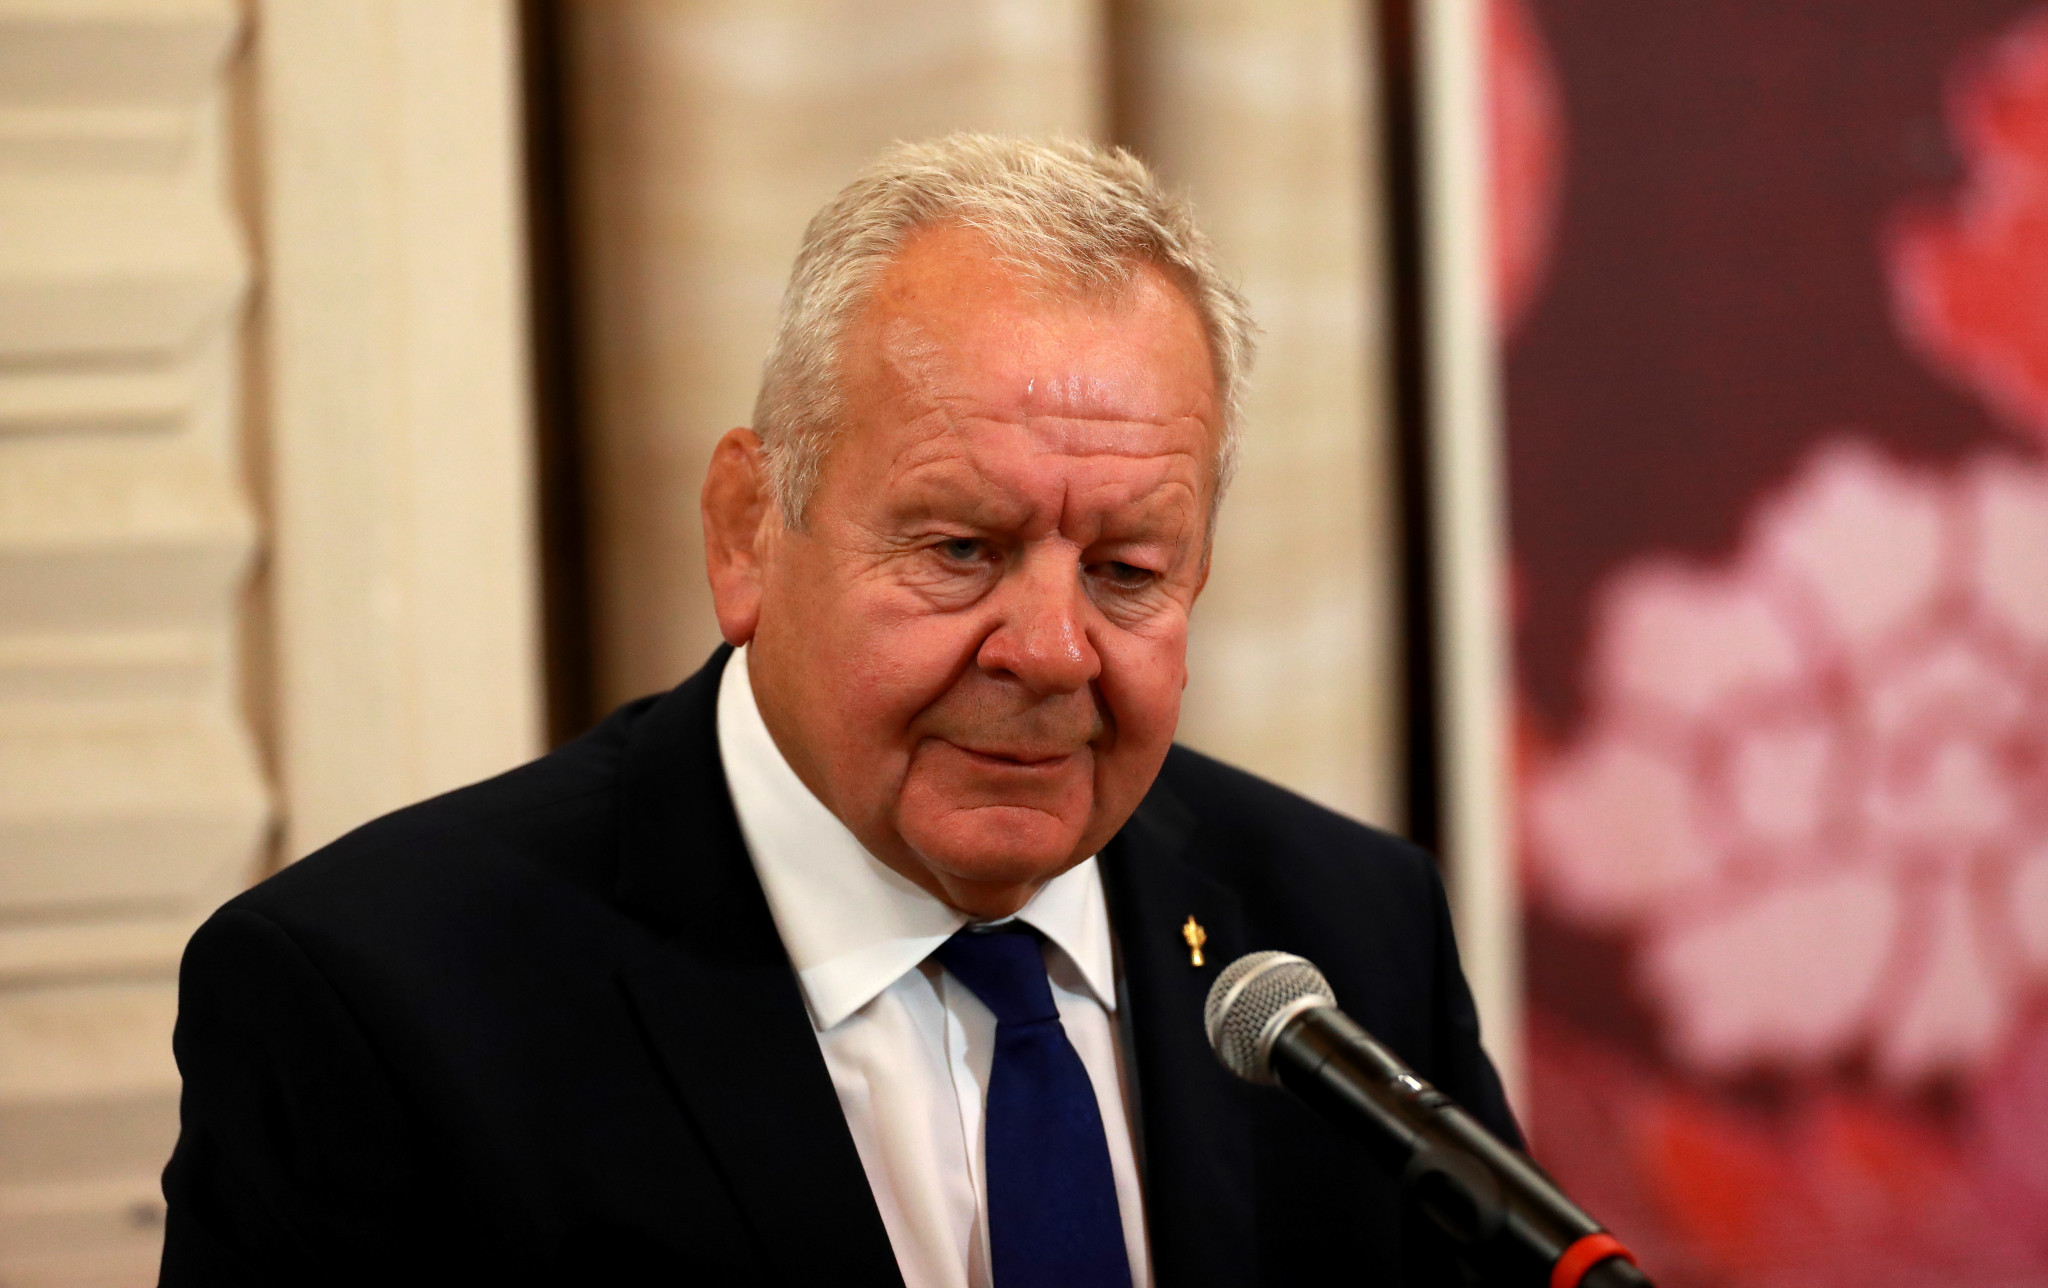 Sir Bill Beaumont is aiming to retain his post as chair of World Rugby however he is being challenged by vice-chair Agustin Pichot ©Getty Images